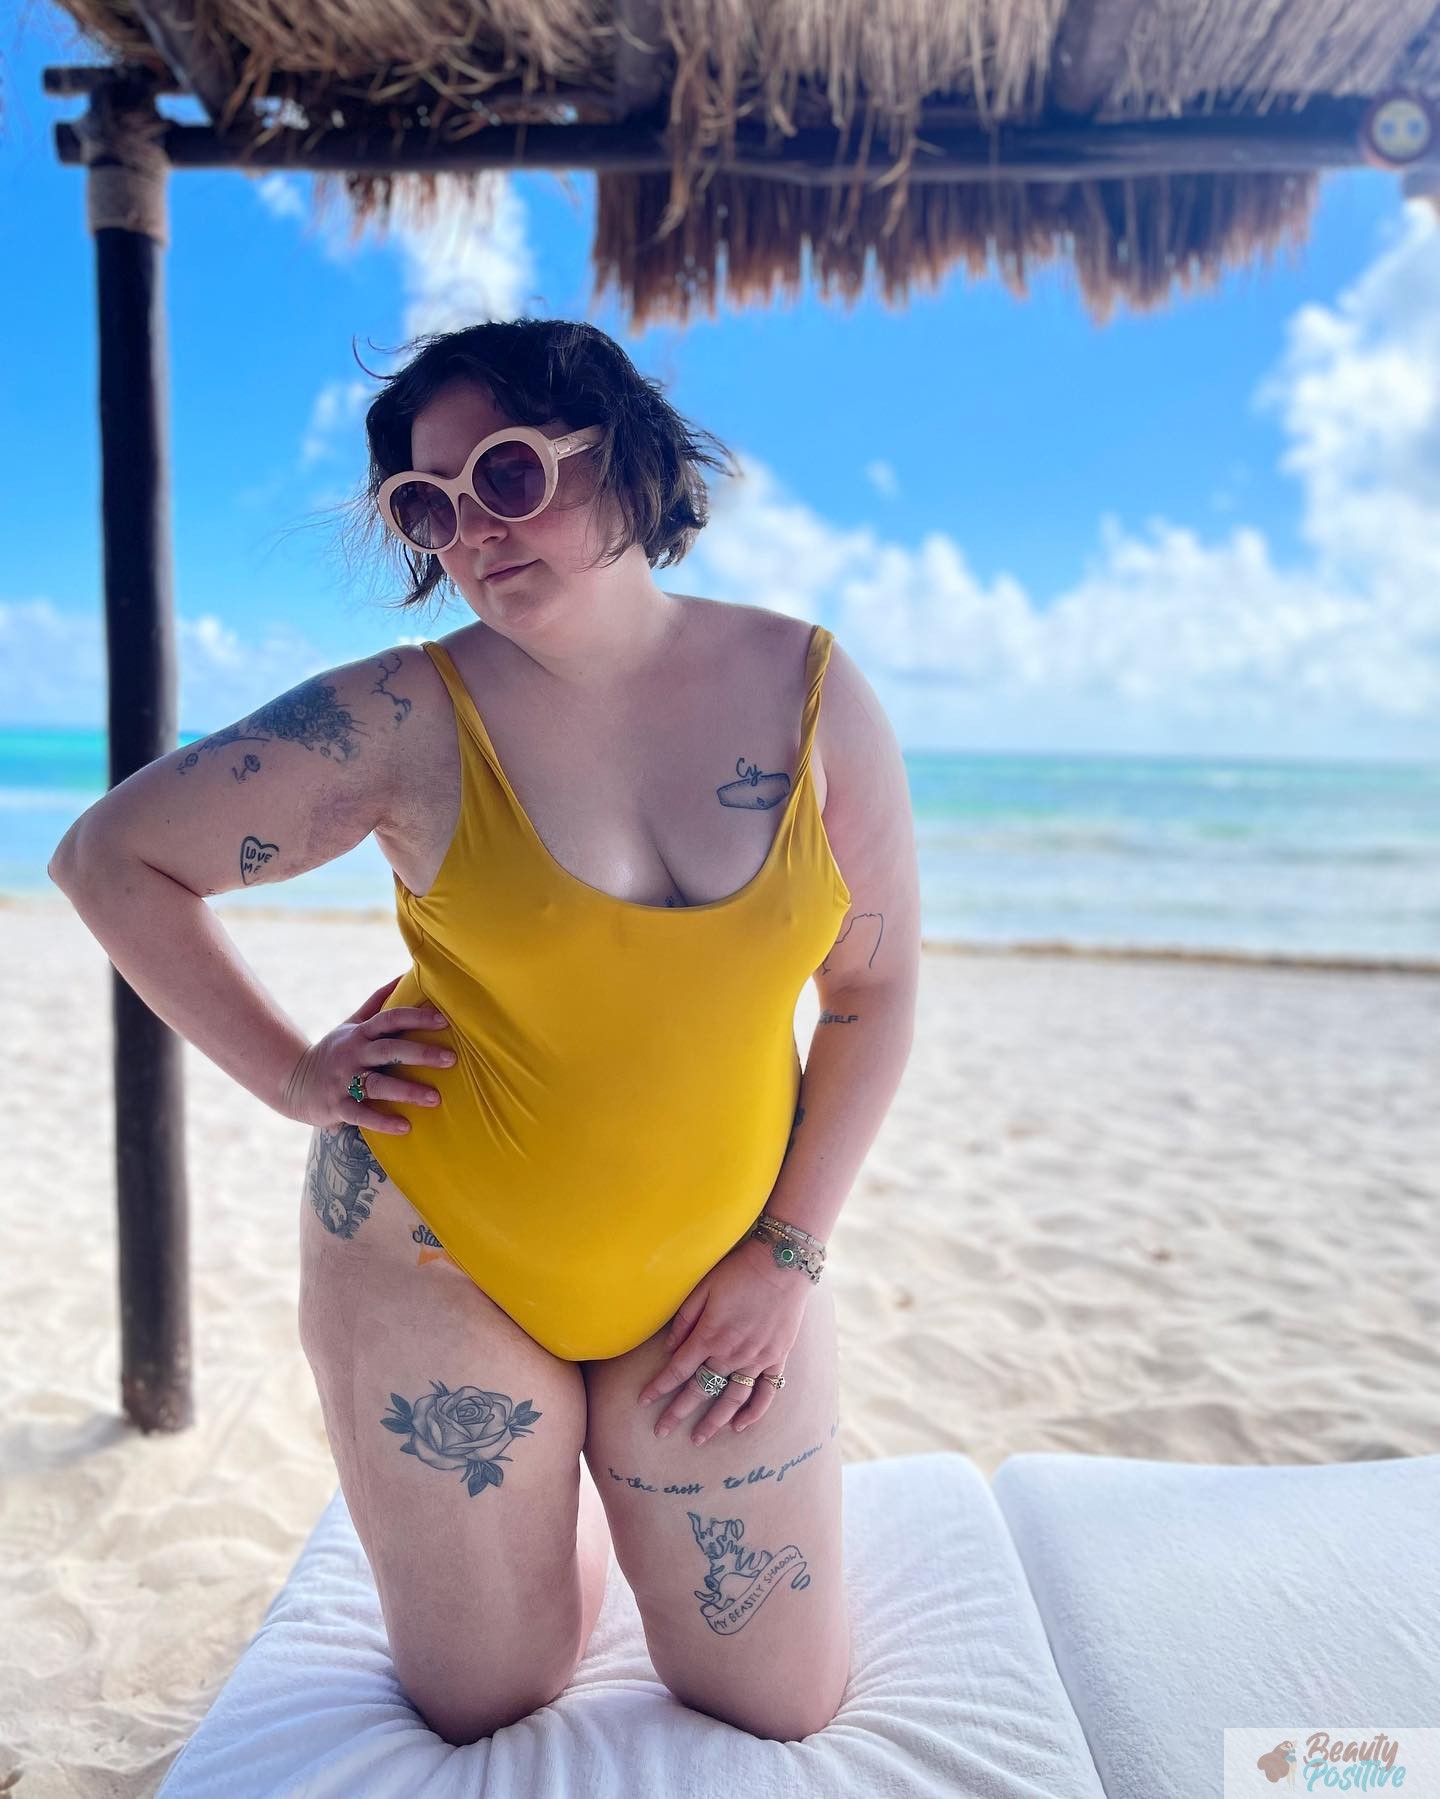 Lena Dunham weight gain no regrets and selflove only